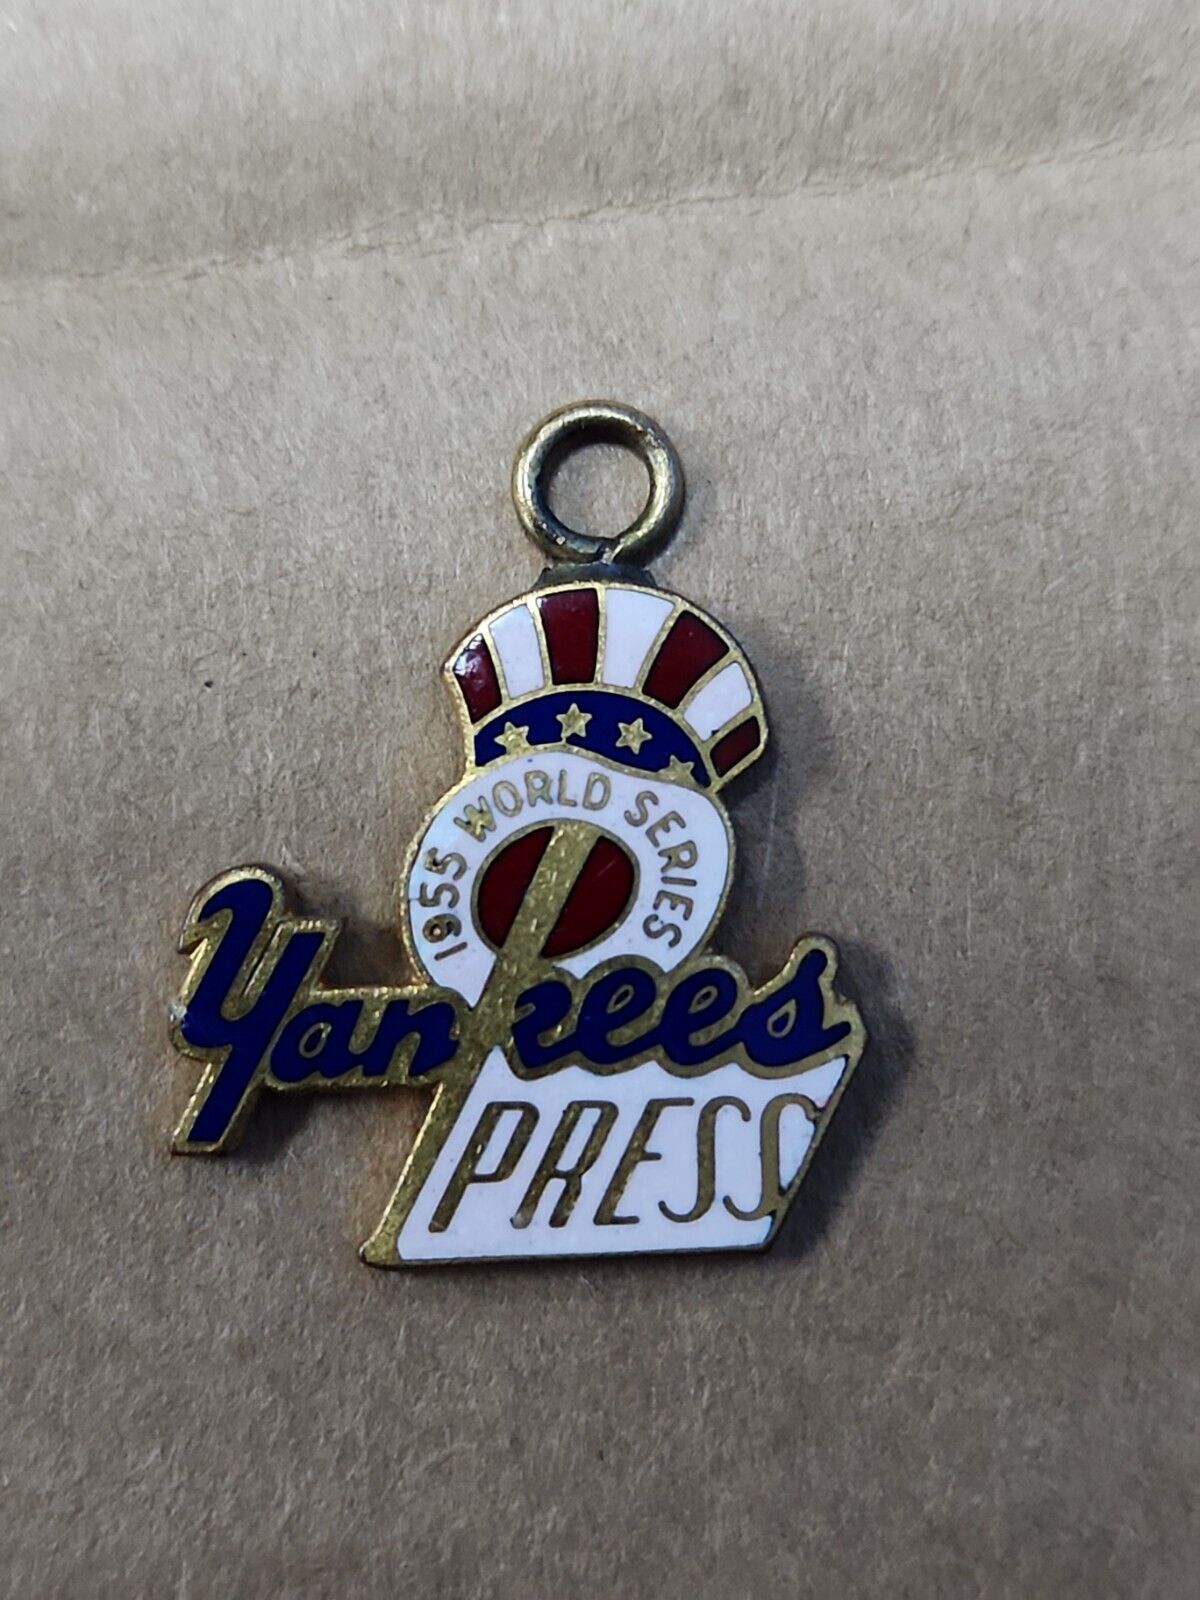 1955 New York Yankees Press Pin. Made Into a Charm Brooklyn's Only Championship